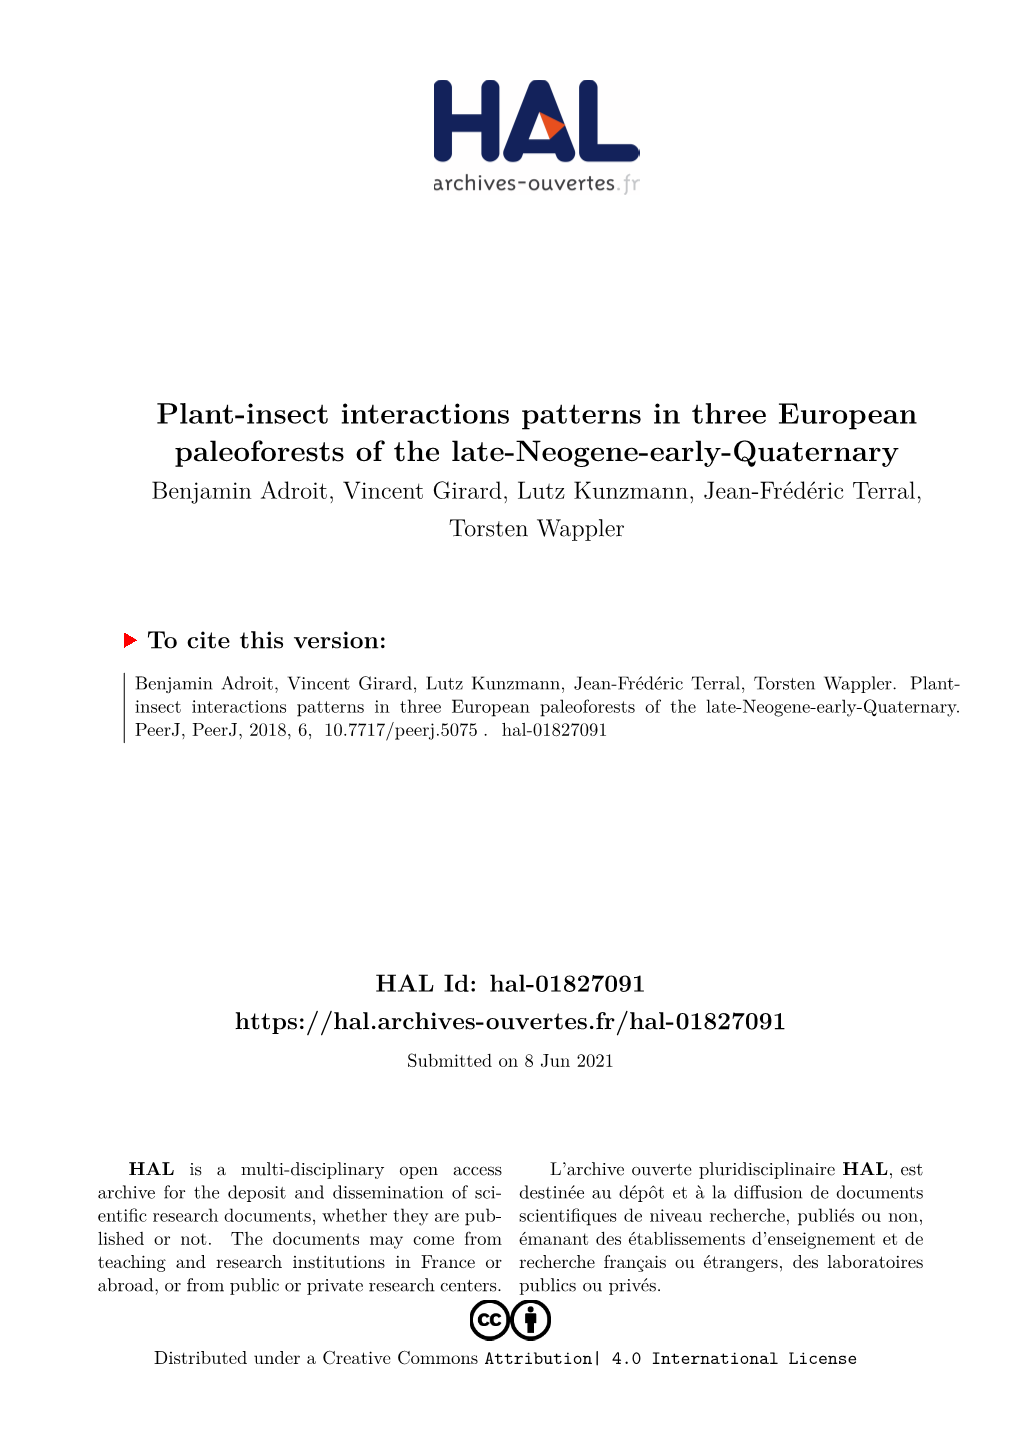 Plant-Insect Interactions Patterns in Three European Paleoforests of The